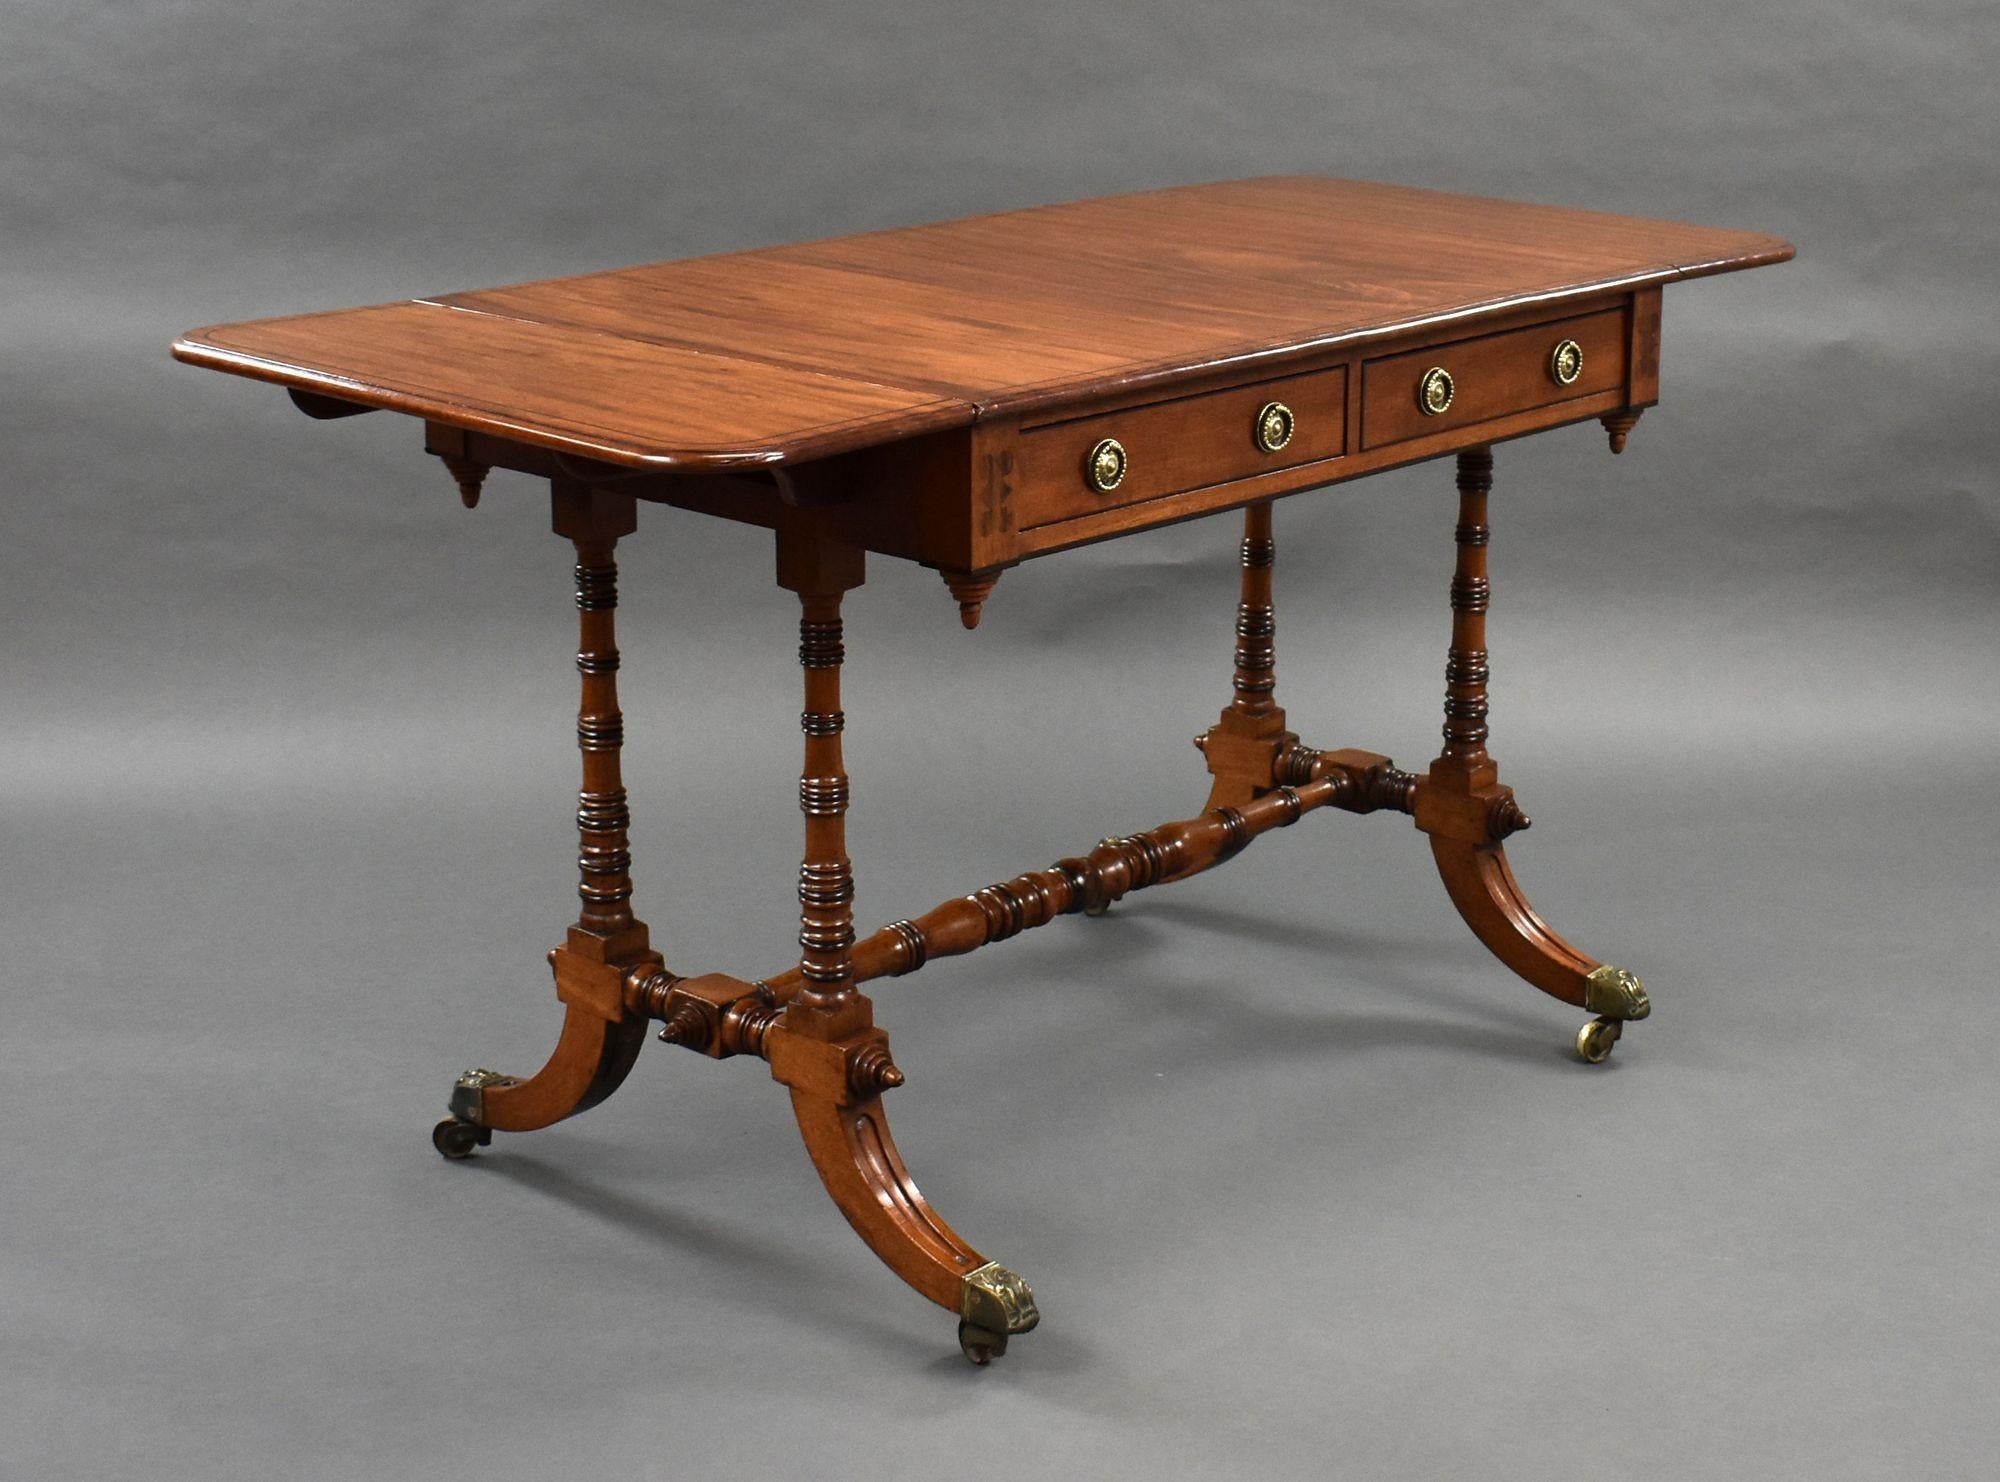 For sale is a good quality Regency mahogany sofa table, having two drawers to the front, and two faux drawers on the opposing side, supported by turned columns united by a turned stretcher, the table stands on elegant splayed legs raised on brass